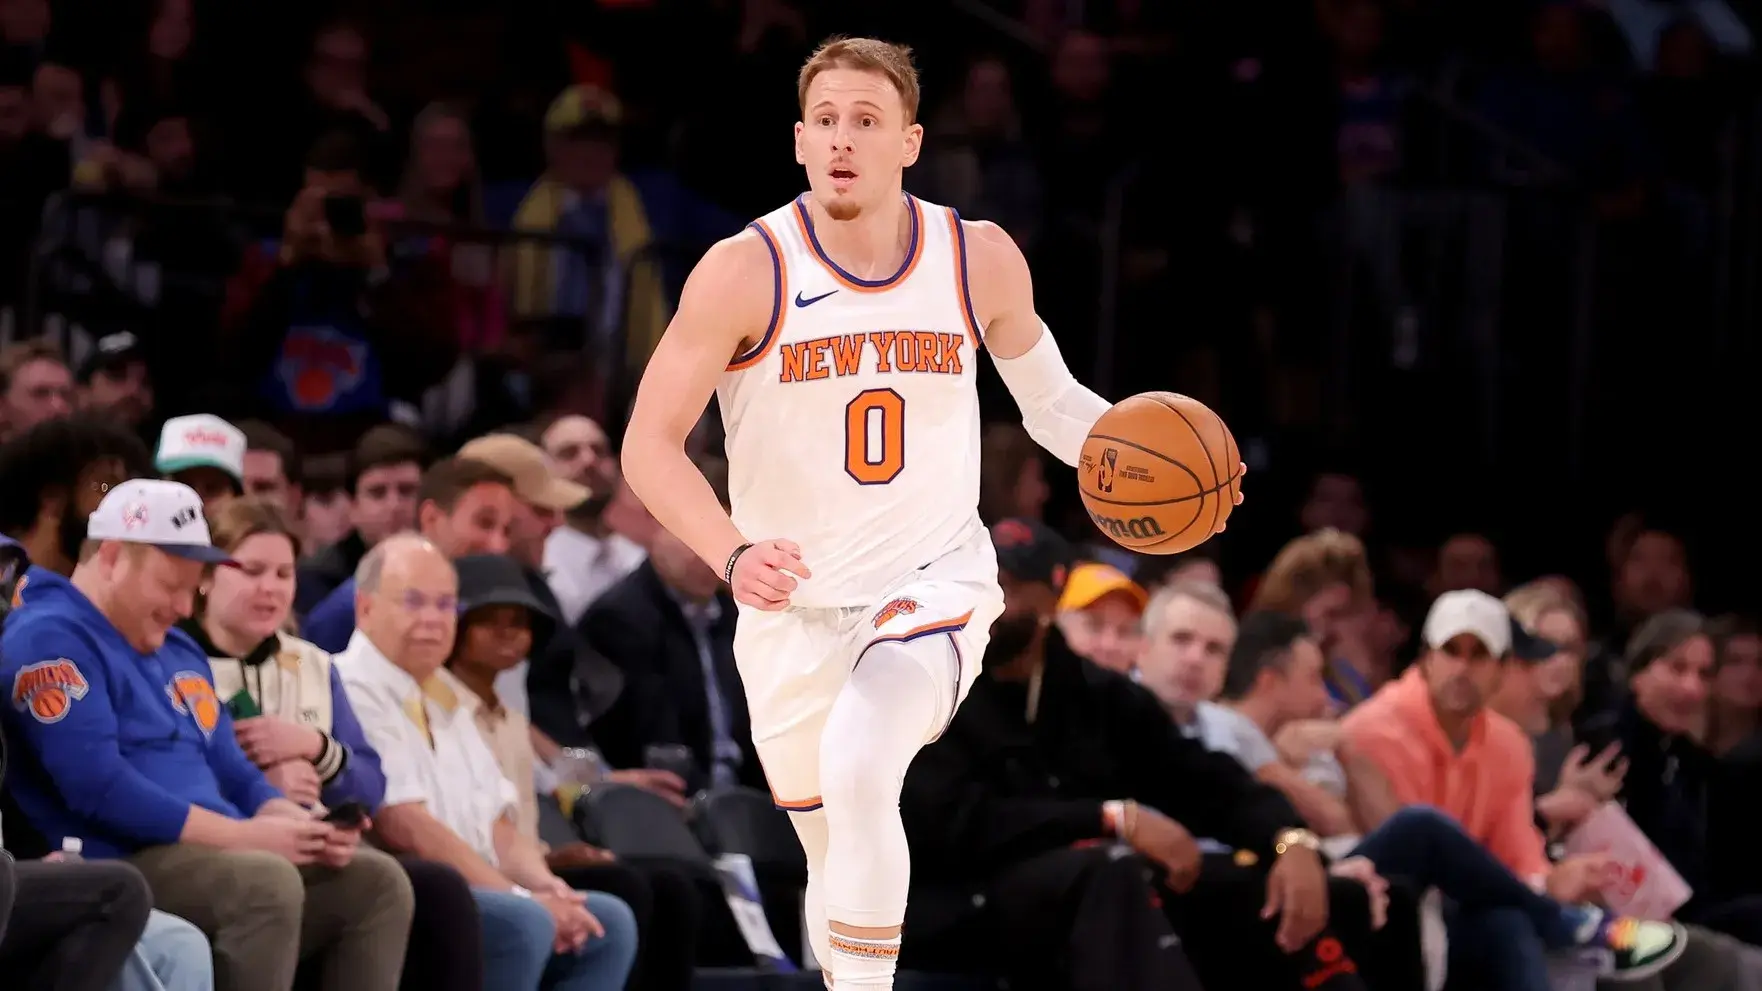 New York Knicks guard Donte DiVincenzo (0) brings the ball up court against the Washington Wizards during the first quarter. / Brad Penner-USA TODAY Sports